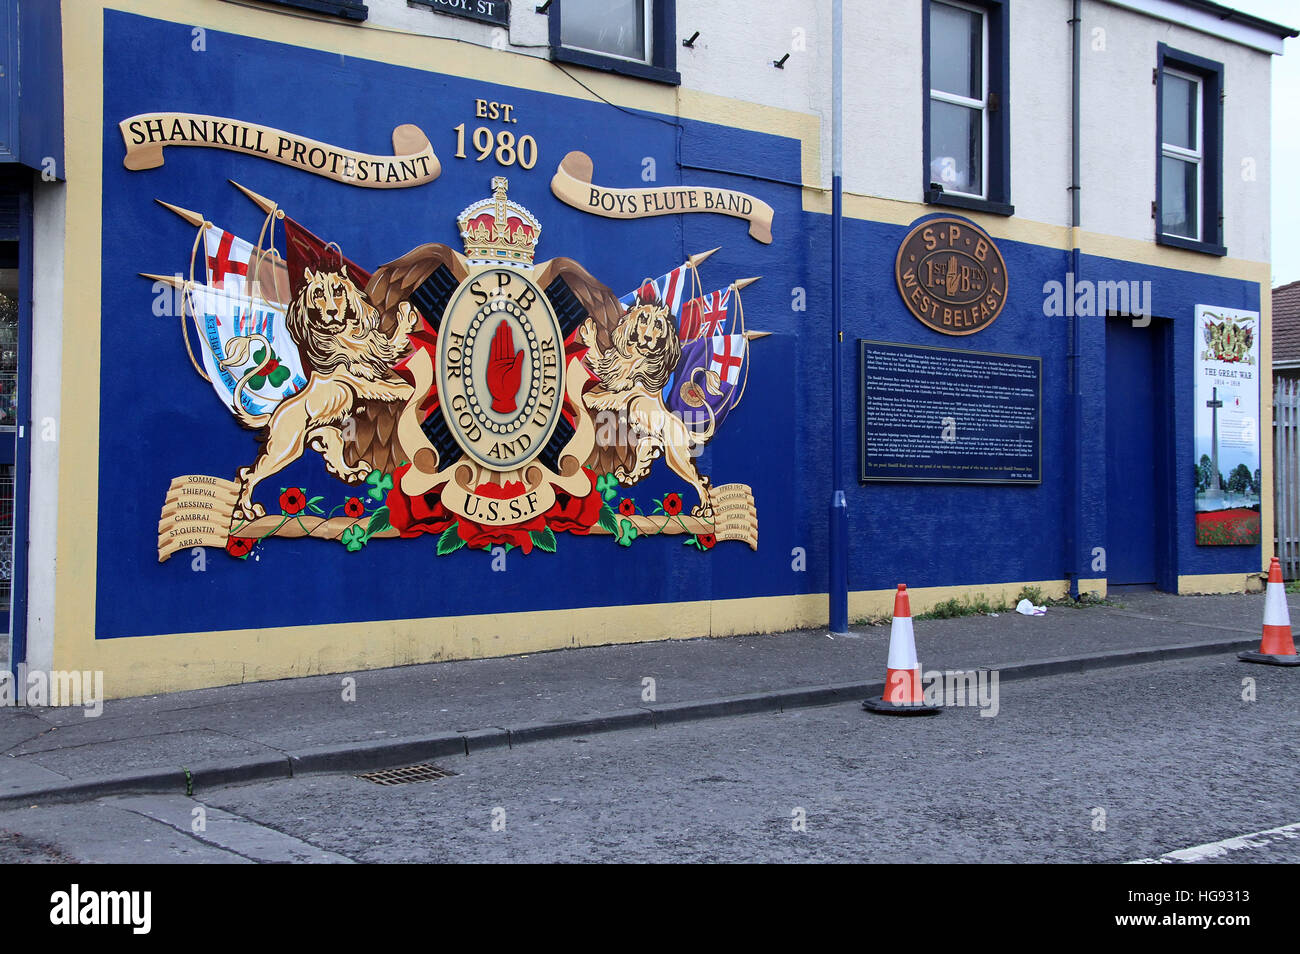 Boys Flute Band Mural on the Shankill Road in Belfast Stock Photo